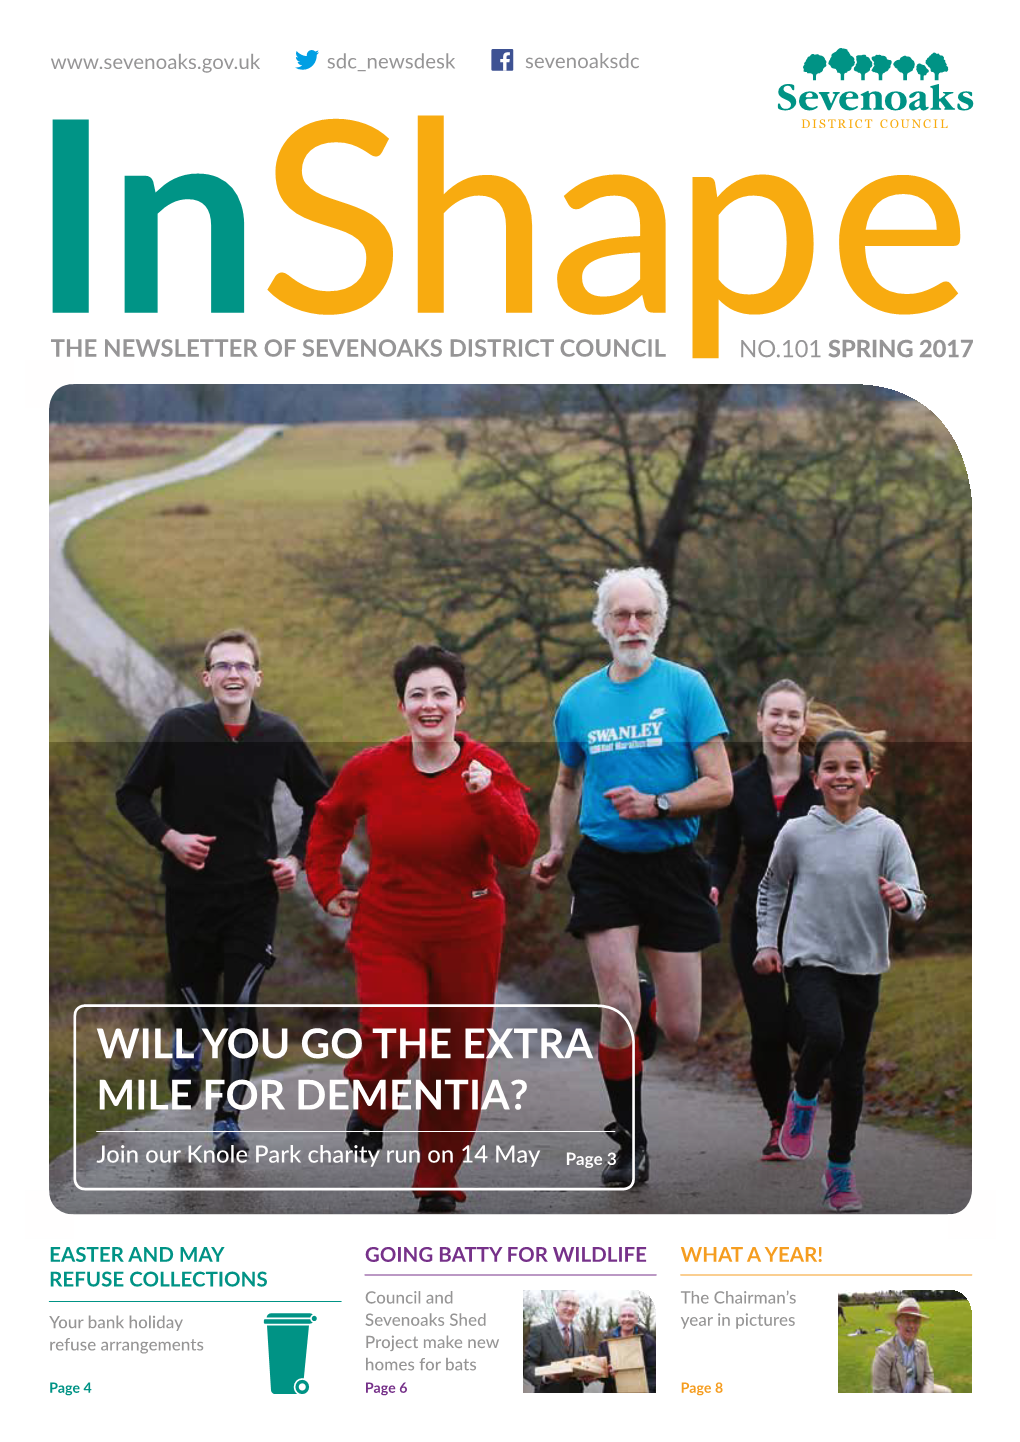 Will You Go the Extra Mile for Dementia?